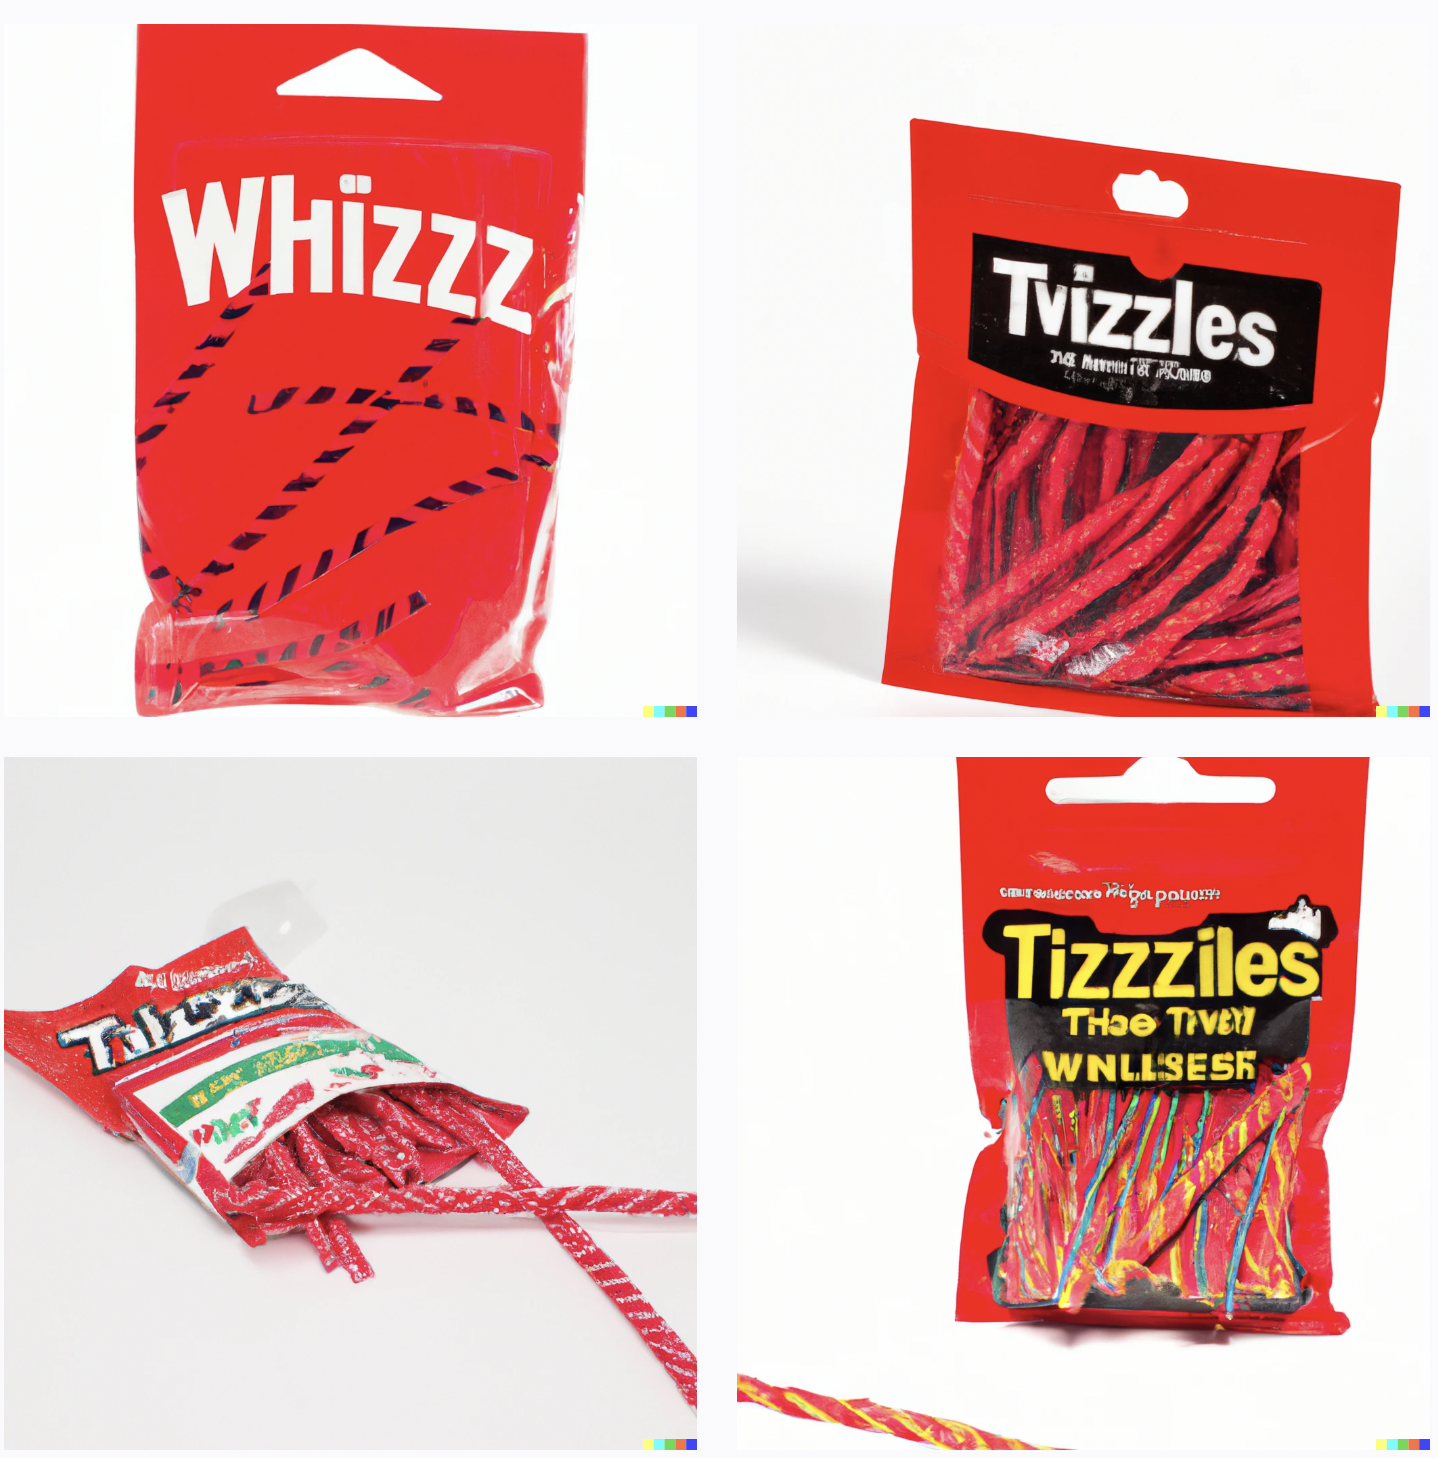 Red and black packages of twisted candy sticks, labeled "Whizzz", "Tvizzles", "Tizzziles"